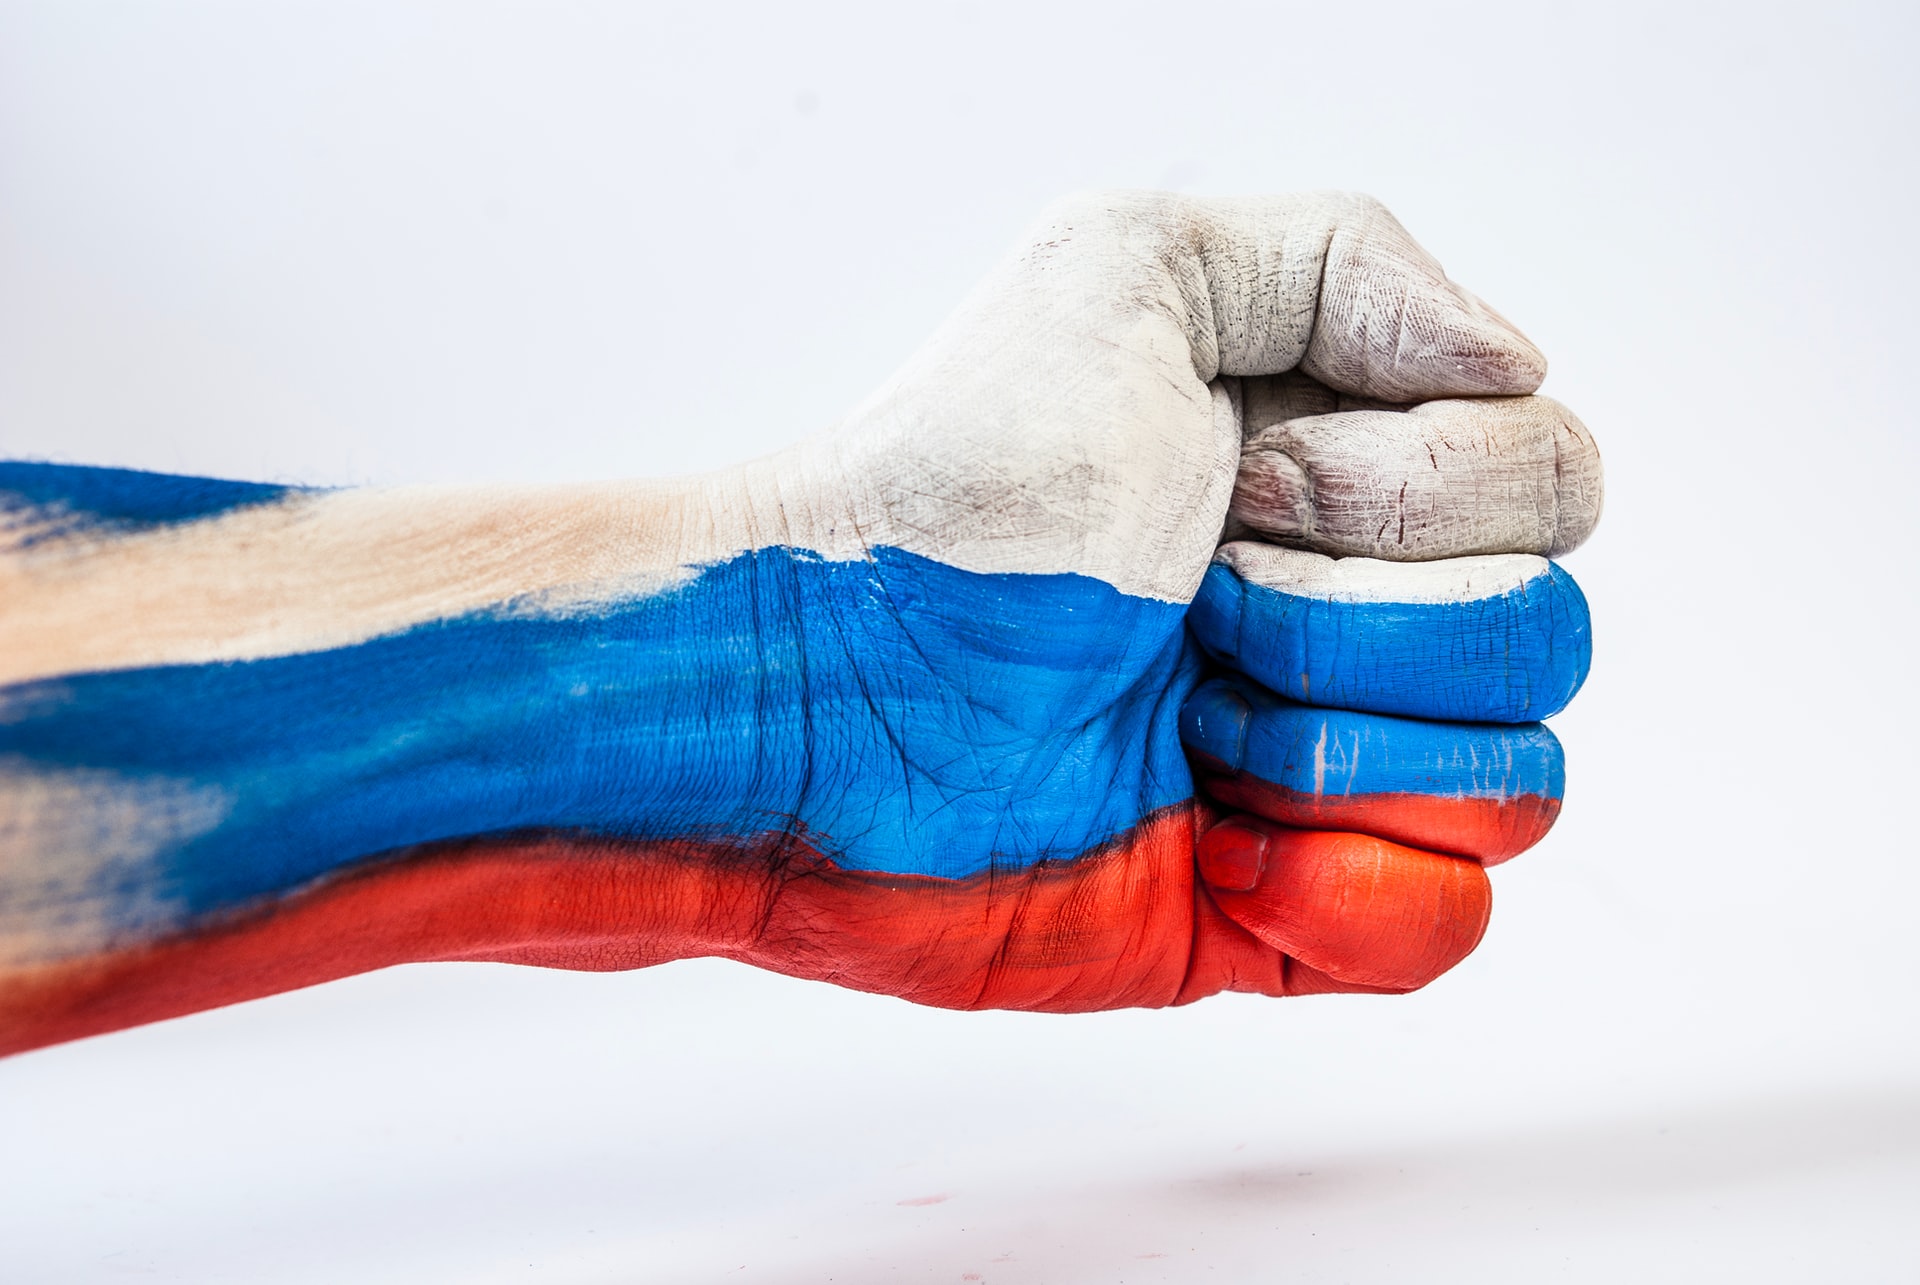 Close fist painted with Russian flag colors